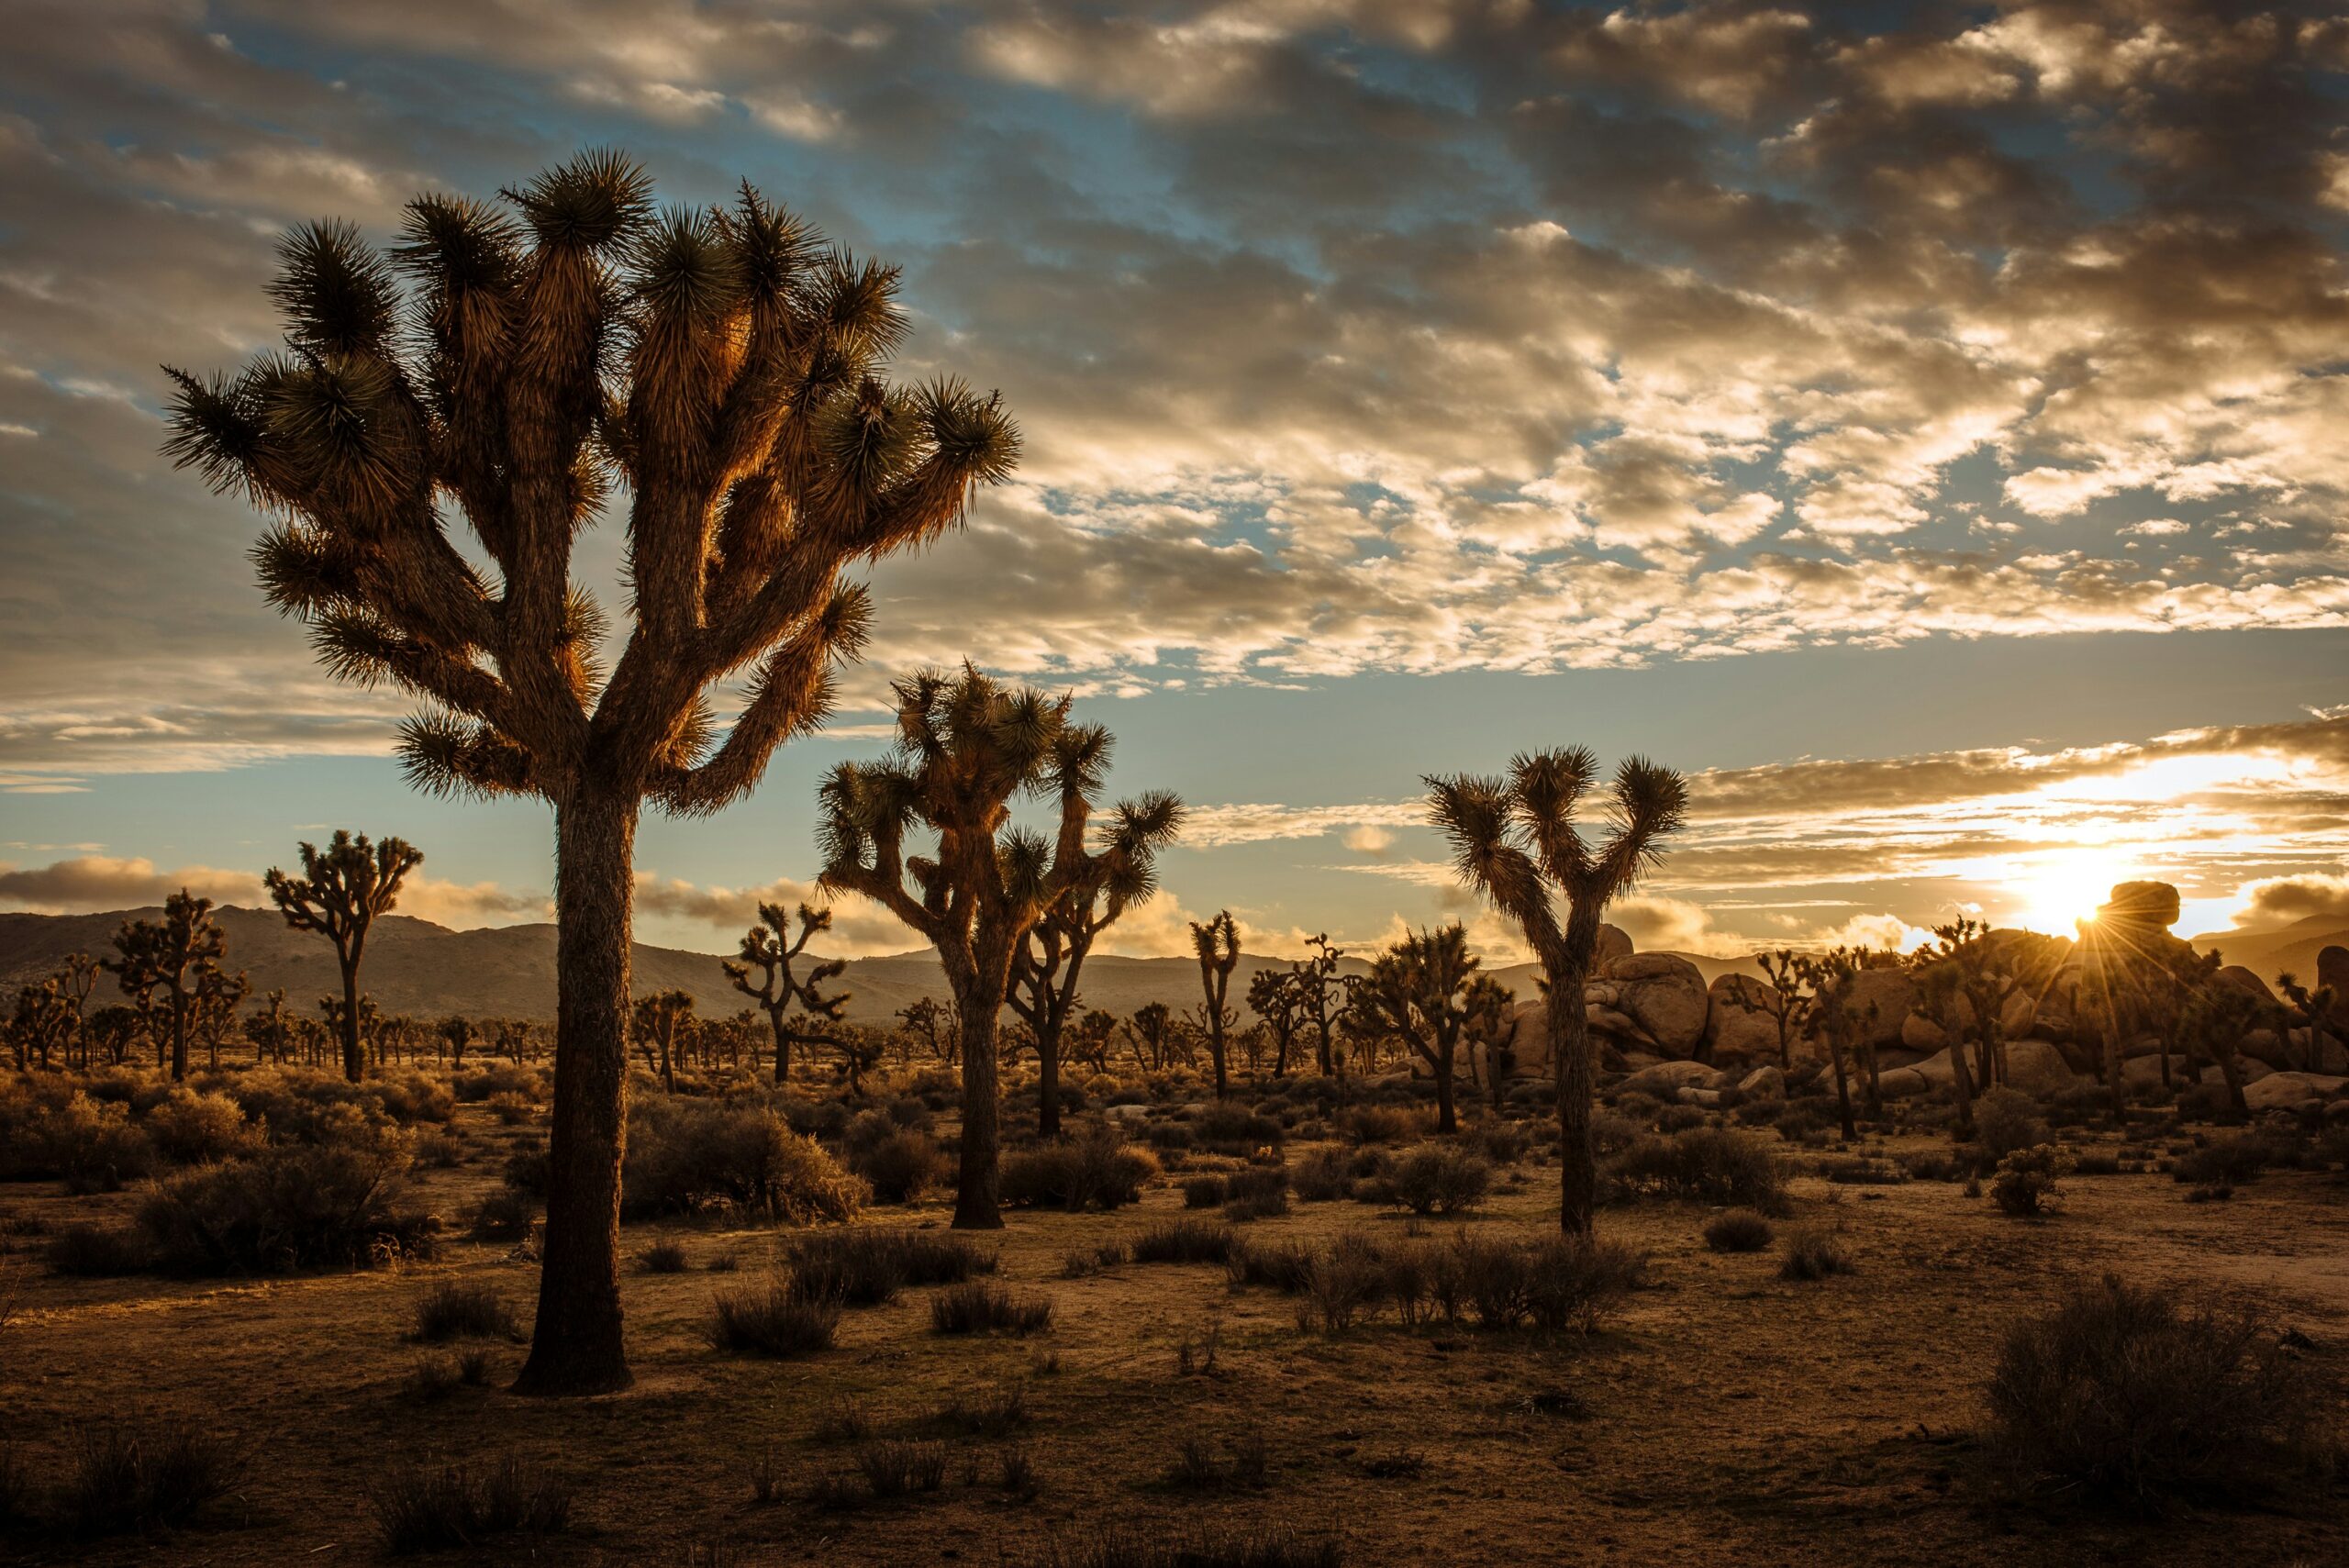 These are the coolest things to do near Coachella.
pictured: the desert near Coachella